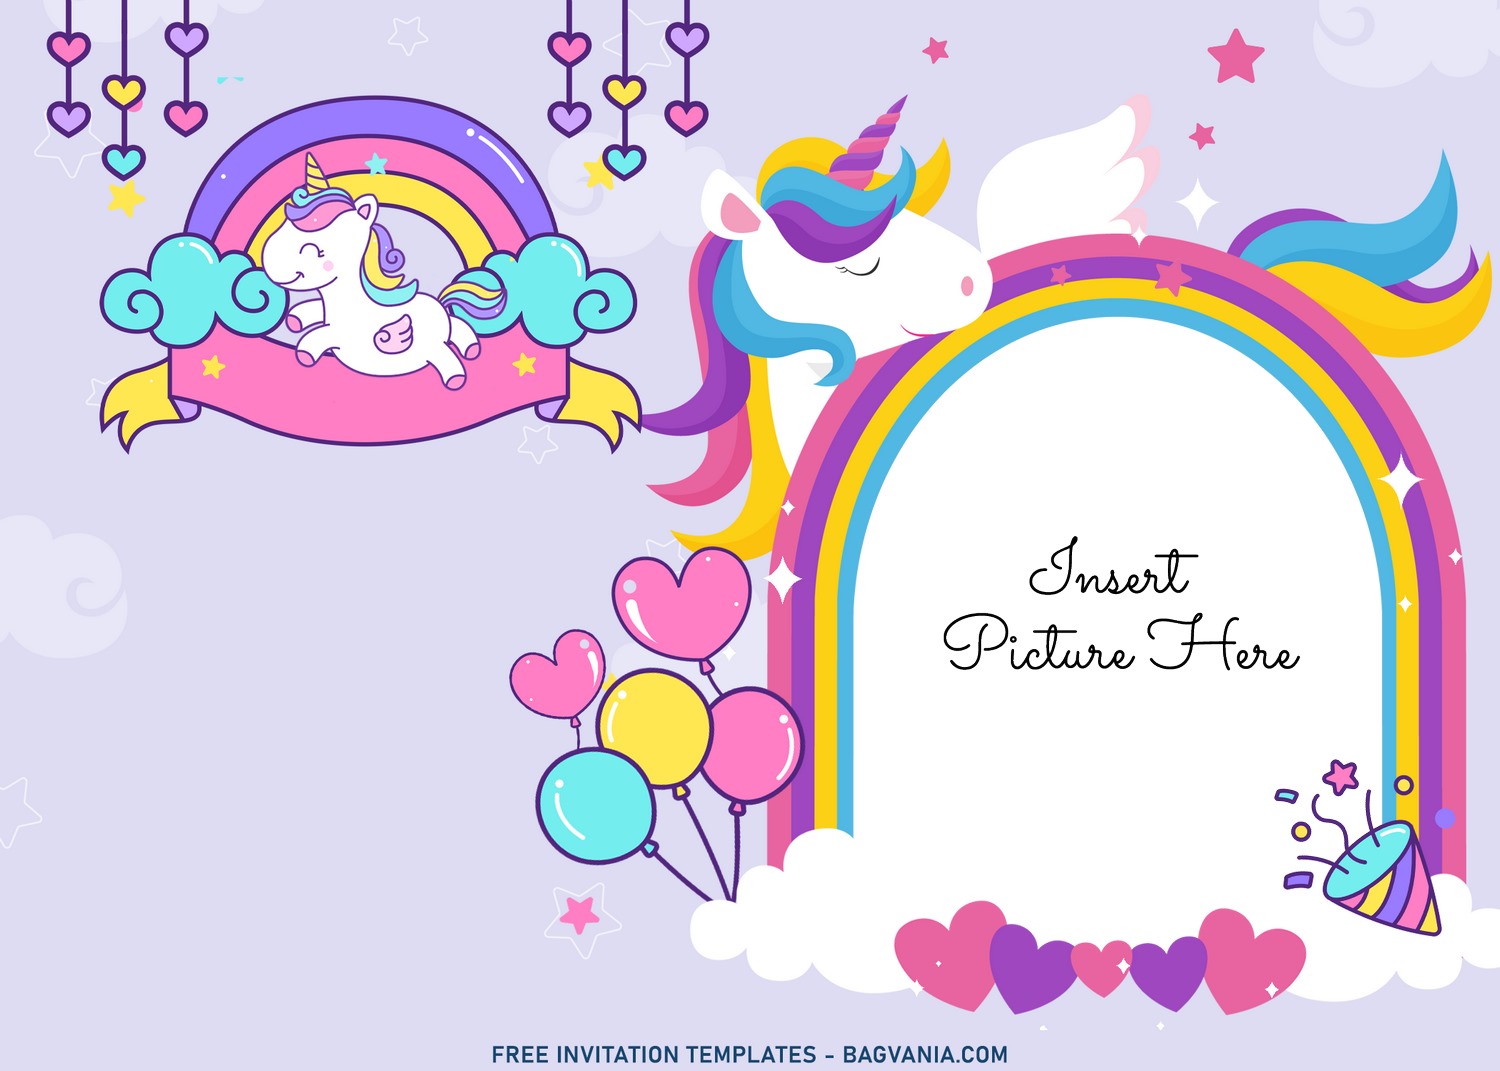 11-magical-unicorn-birthday-invitation-templates-with-colorful-pastel